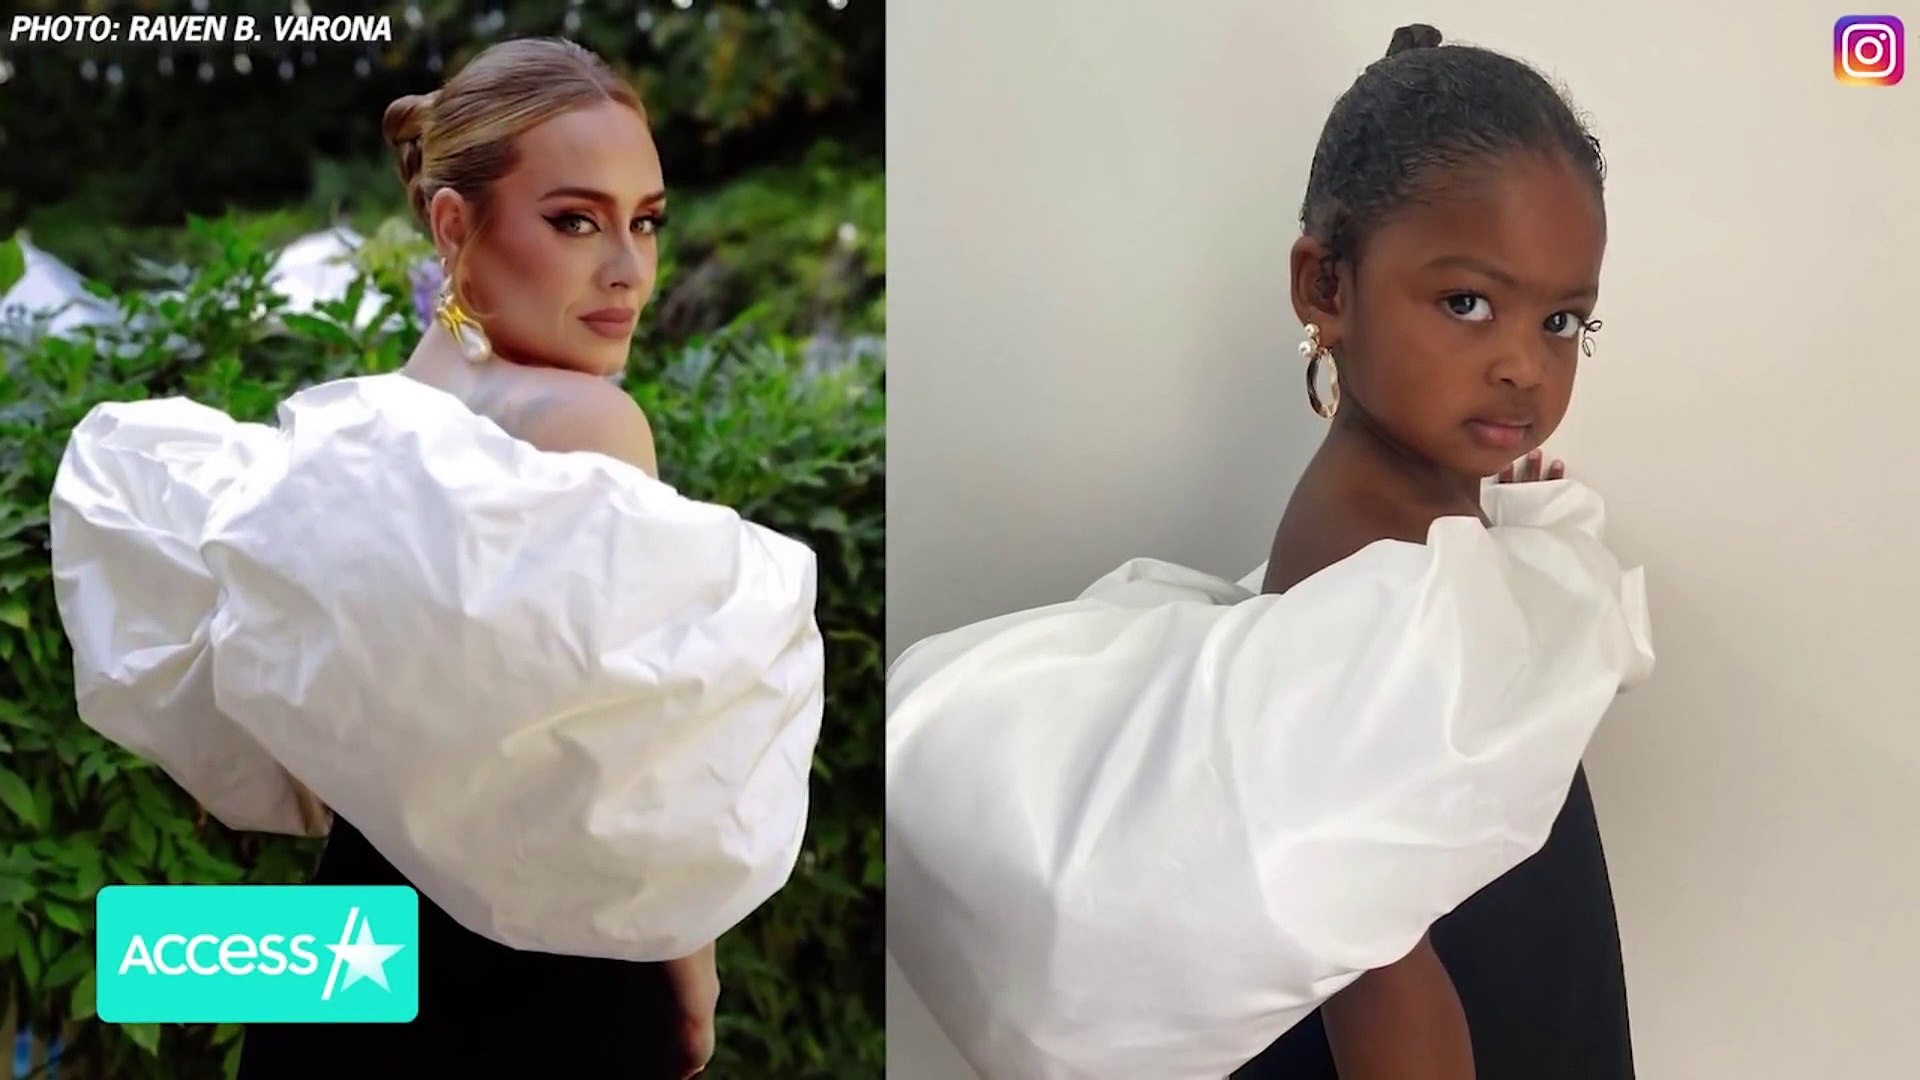 See Gabrielle Union's daughter's spot-on Adele Halloween costume